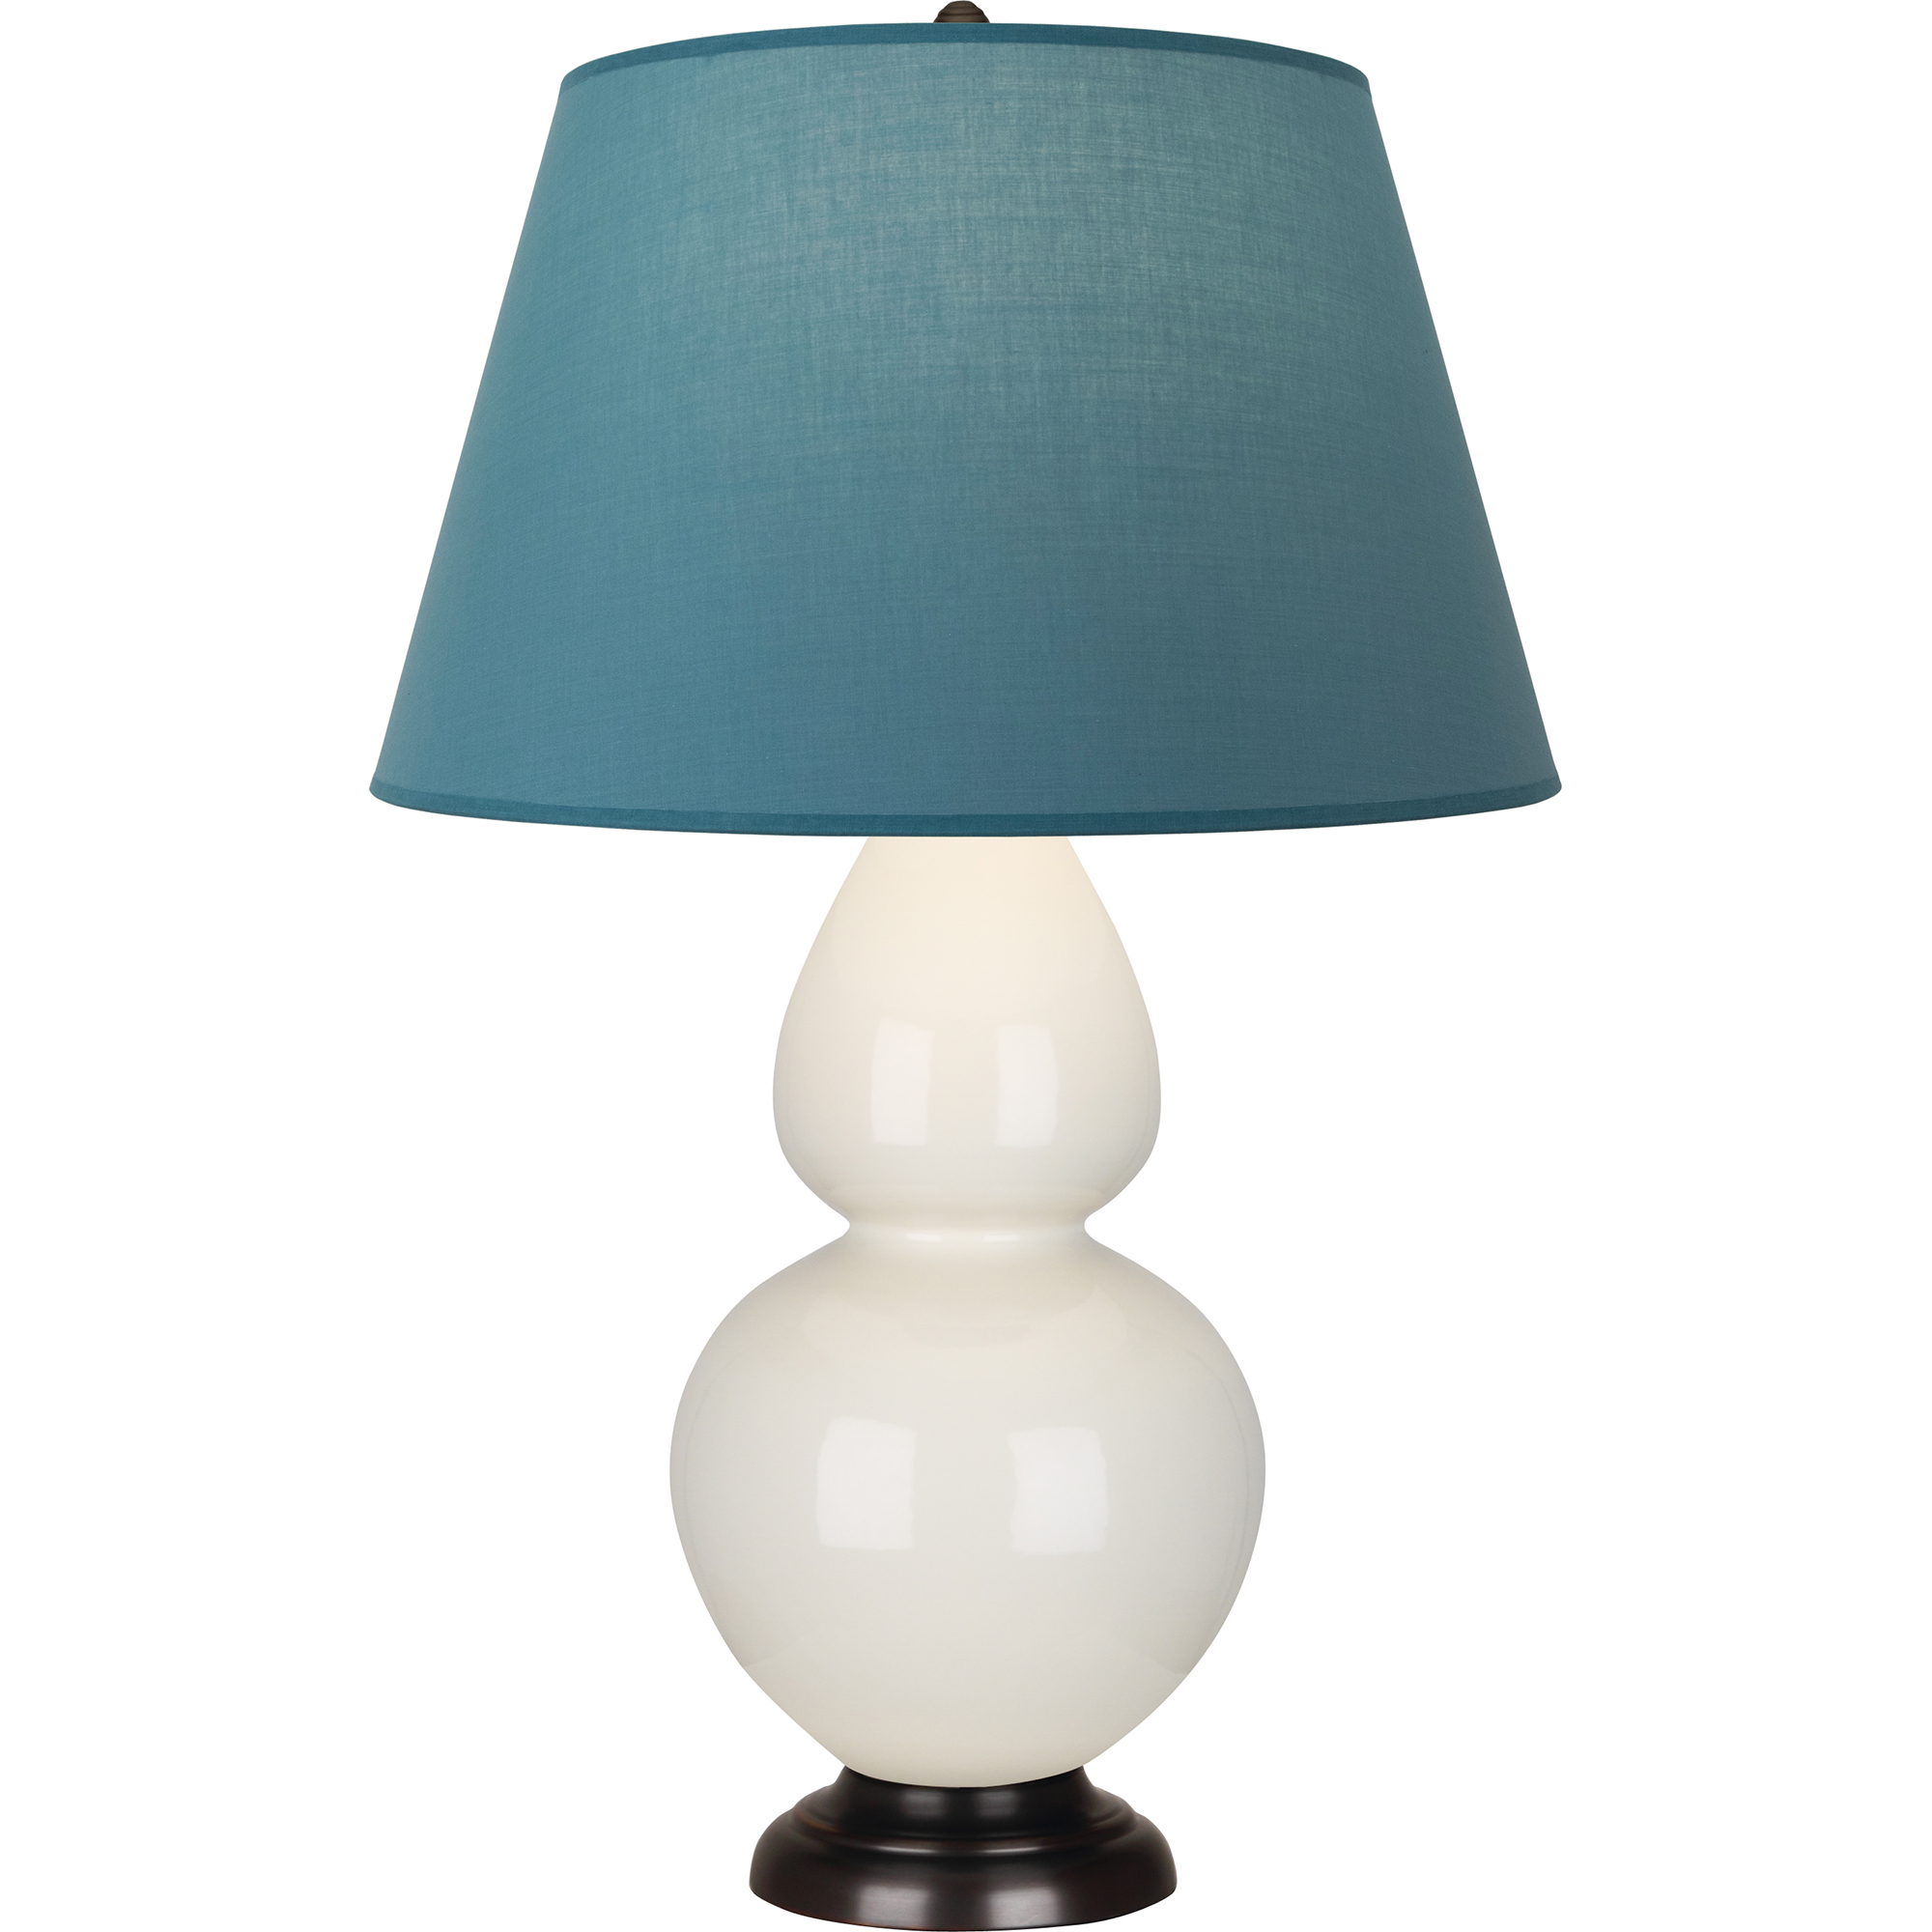 Double Gourd Table Lamp Style #1755B